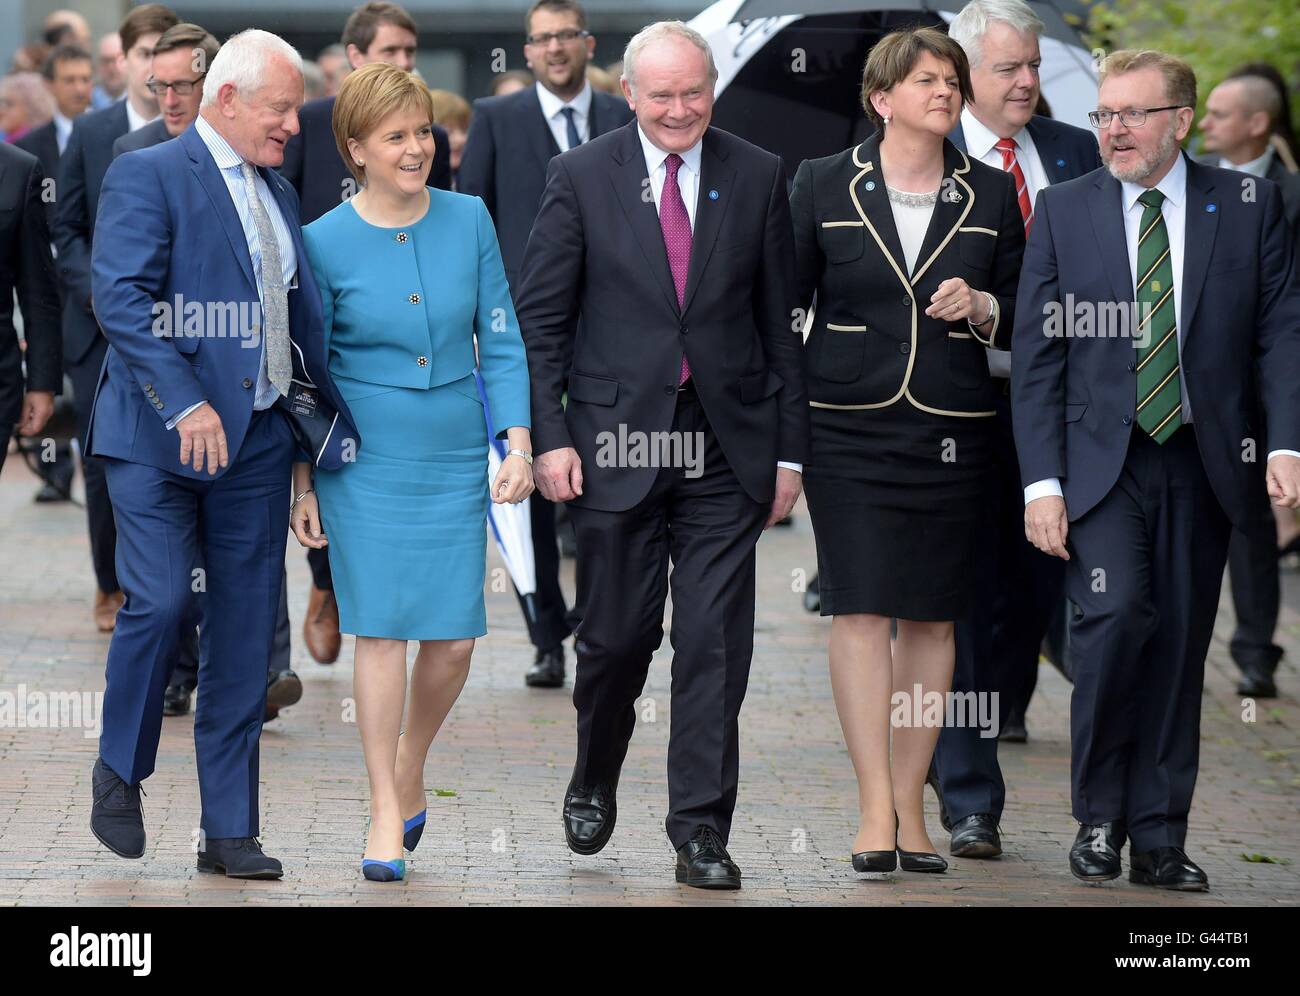 (From the left) Allan Bell Chief Minister Isle of Man, Nicola Sturgeon First Minister of Scotland, Martin McGuinness deputy First Minister Northern Ireland, Arlene Foster First Minister of Northern Ireland Executive, and David Mundell Secretary of State for Scotland during the British-Irish Council Summit meeting hosted by the Scottish Government in Glasgow. Stock Photo